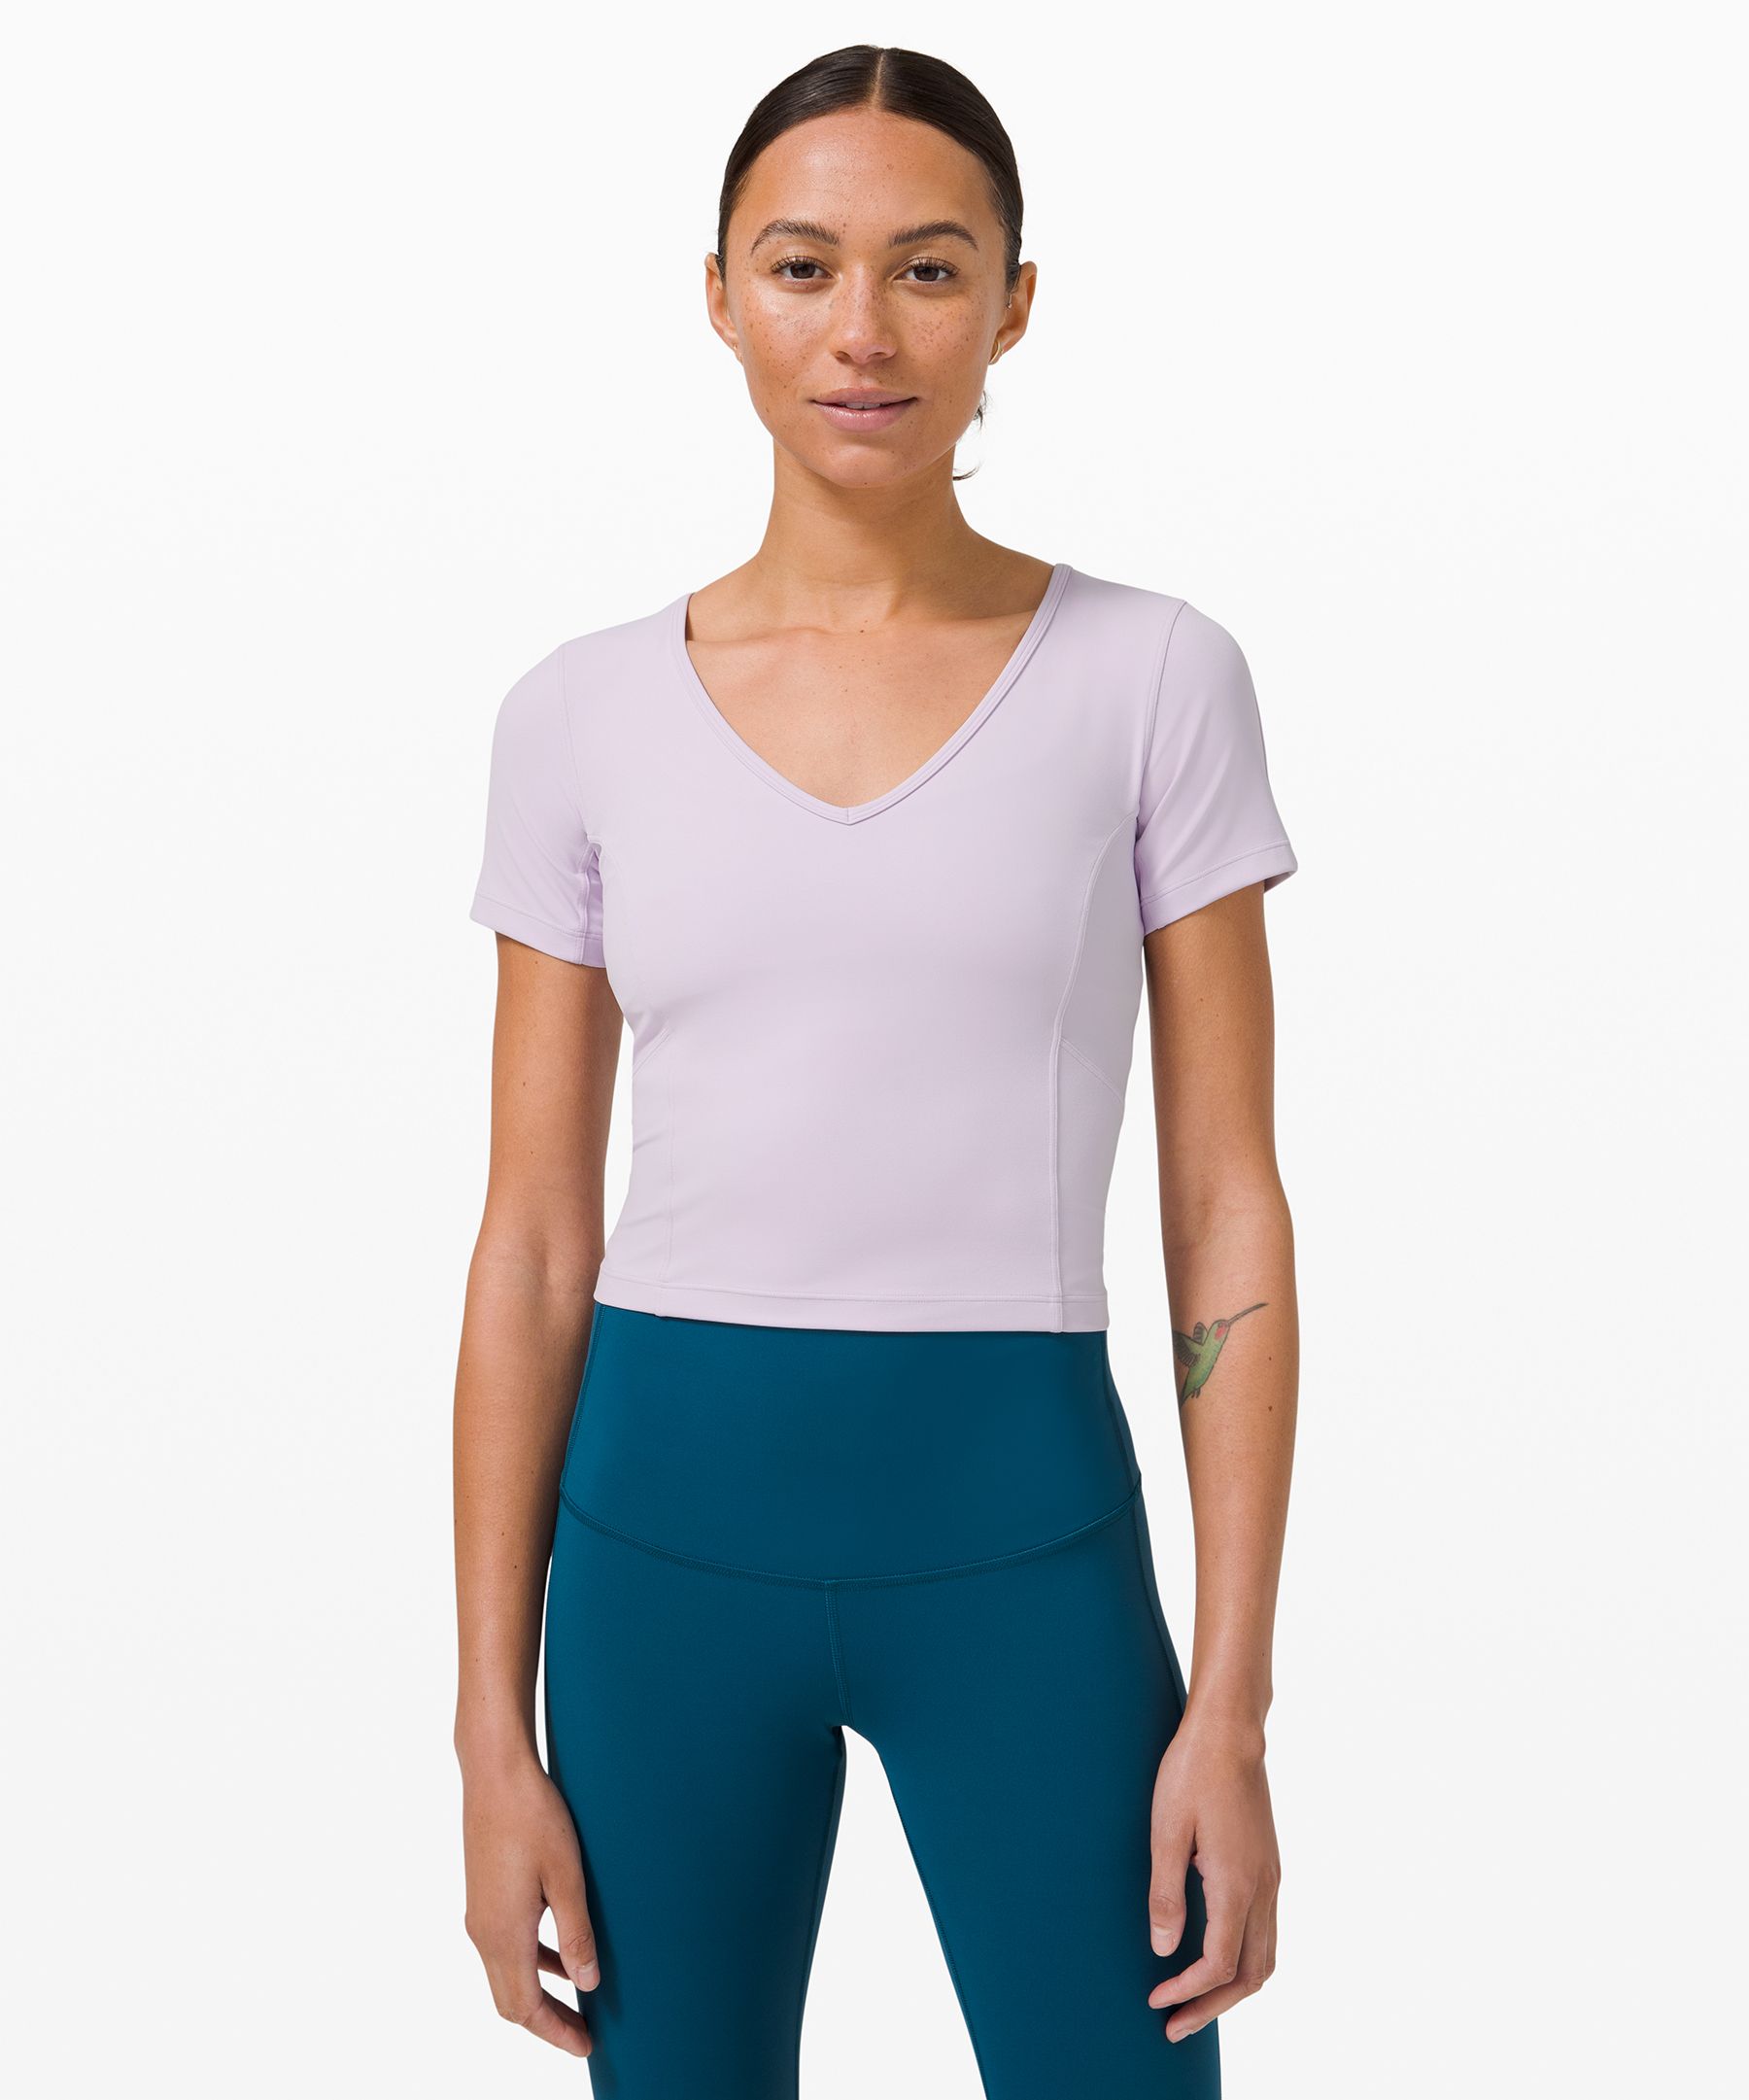 New Nulu Cropped Short Sleeve in Pink Mist!